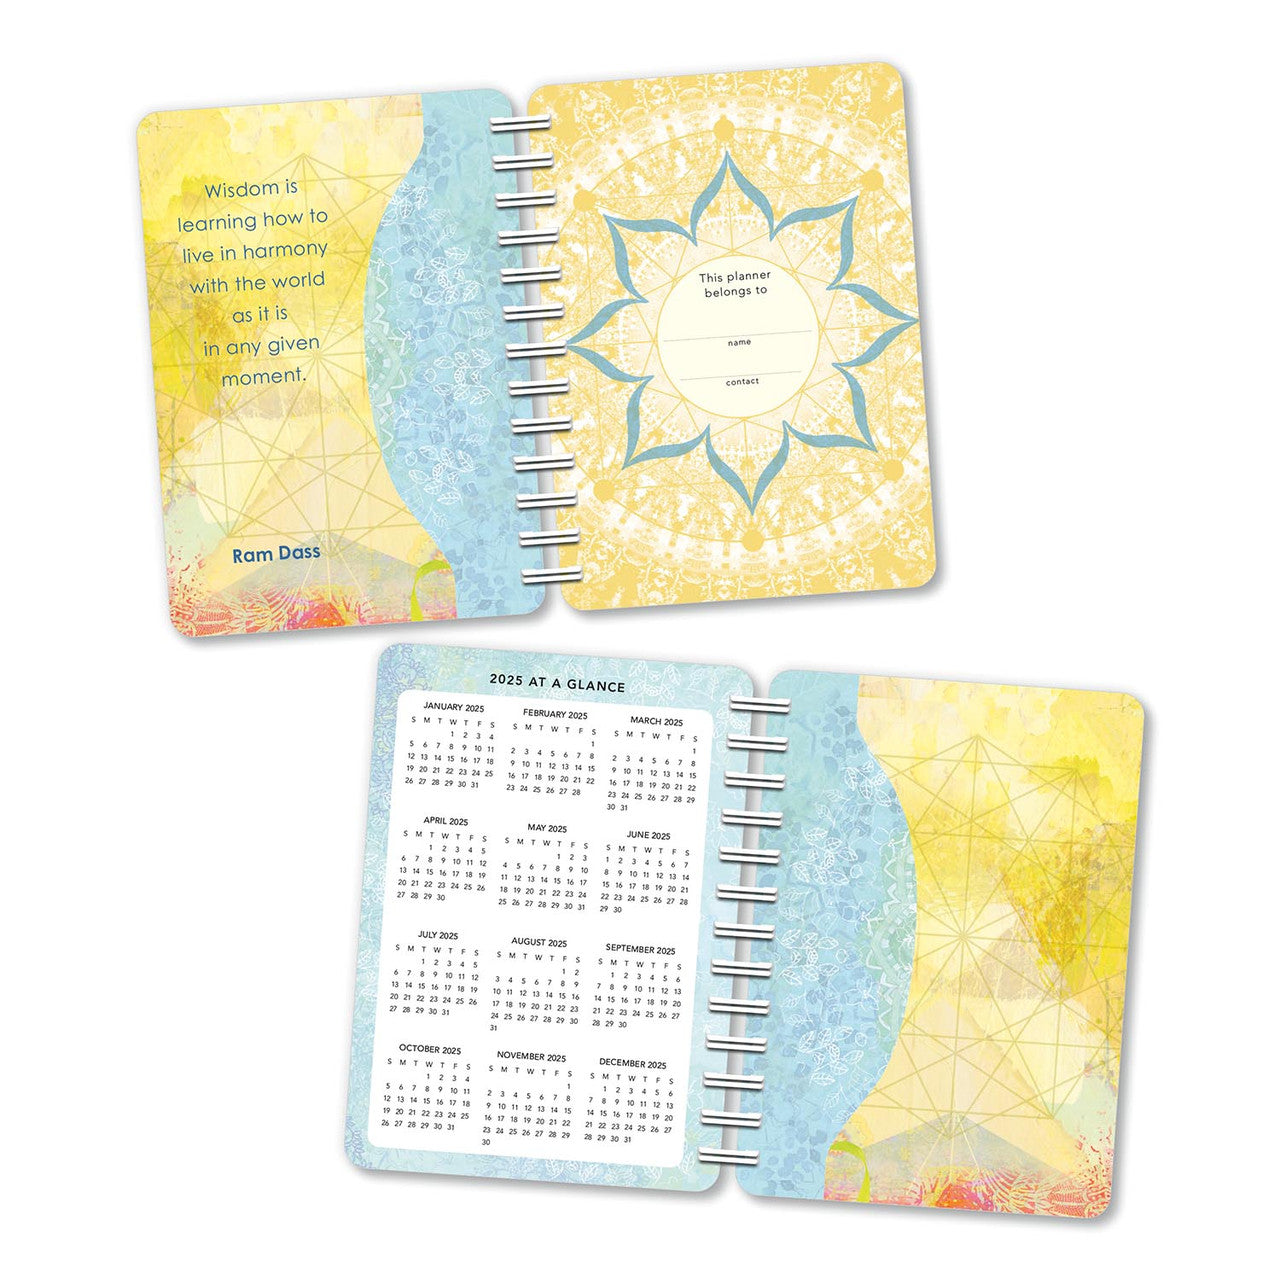 Ram Dass Be Here Now 2024 Weekly Planner    